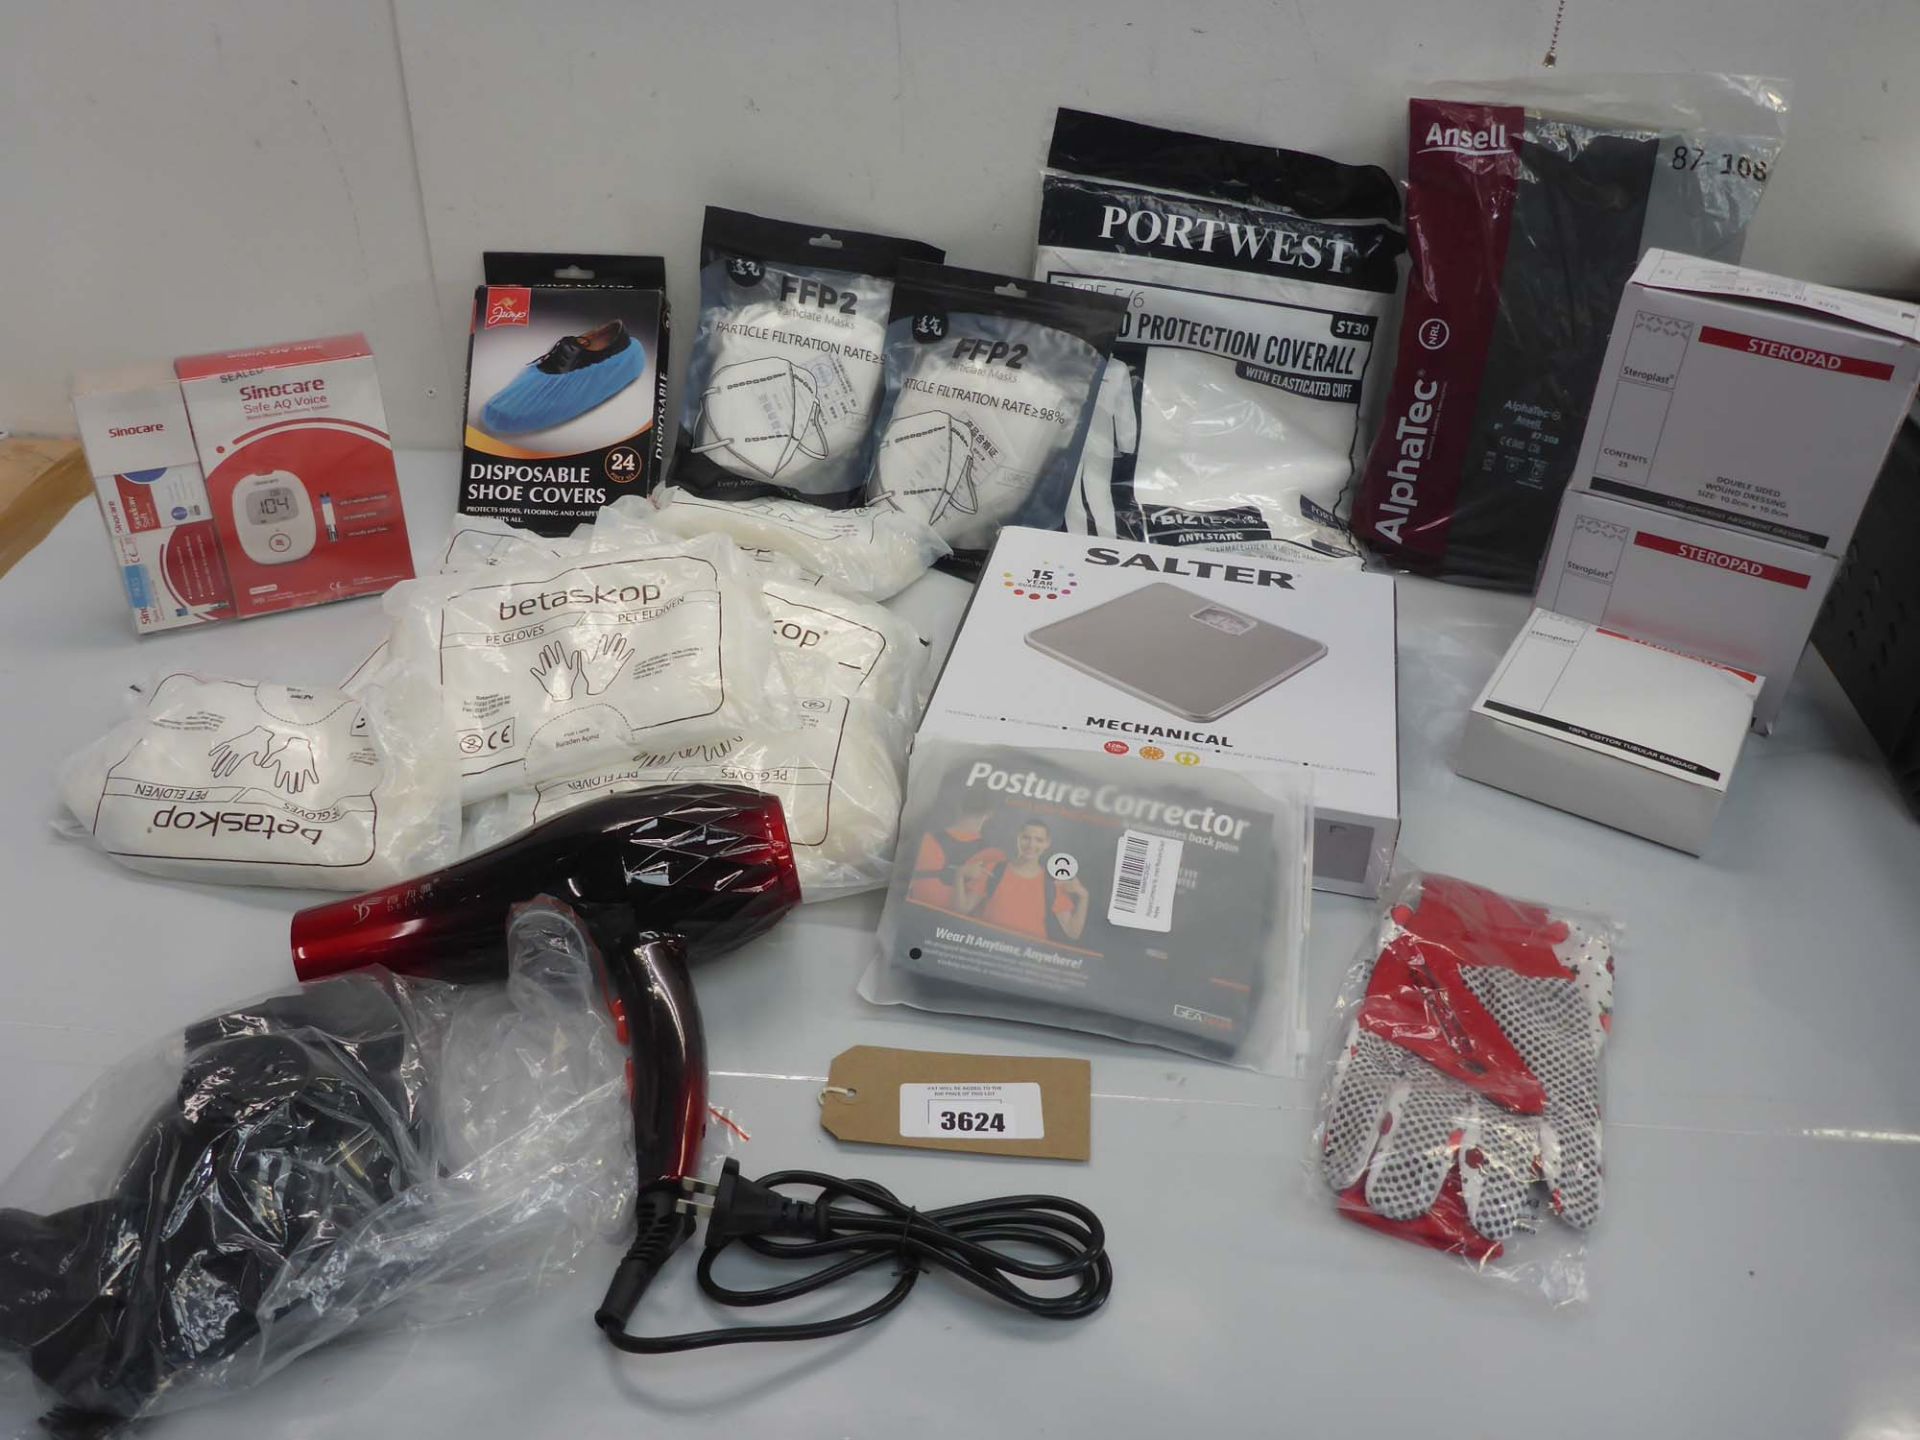 Salter scales, protective overalls, gloves, face masks & shoe covers, Sinocare blood glucose